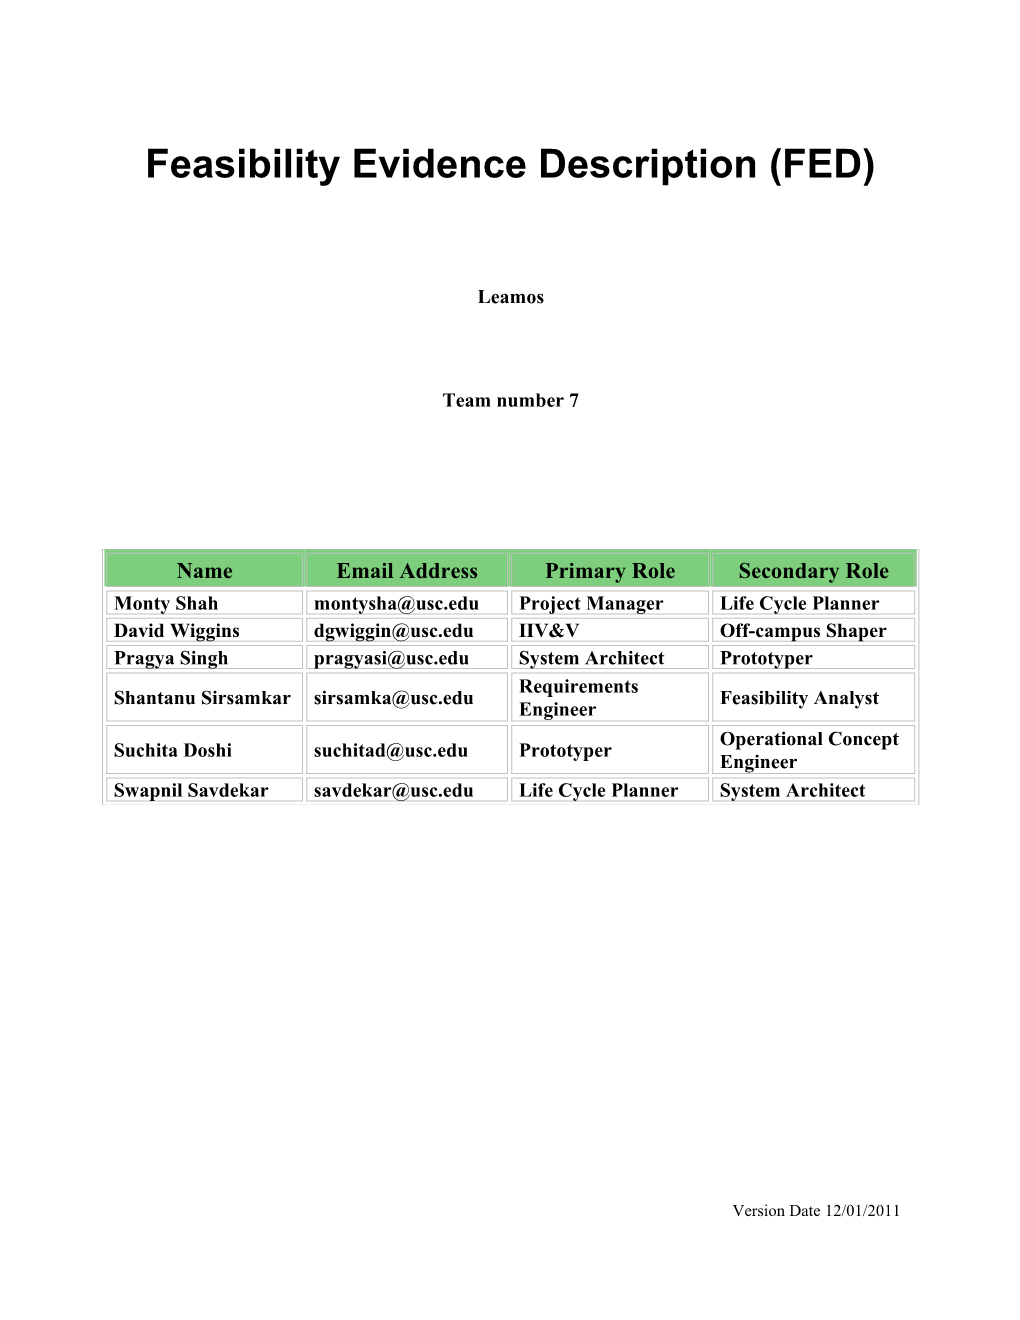 Feasibility Evidence Description (FED) for NDI/ NCS Version 3.1